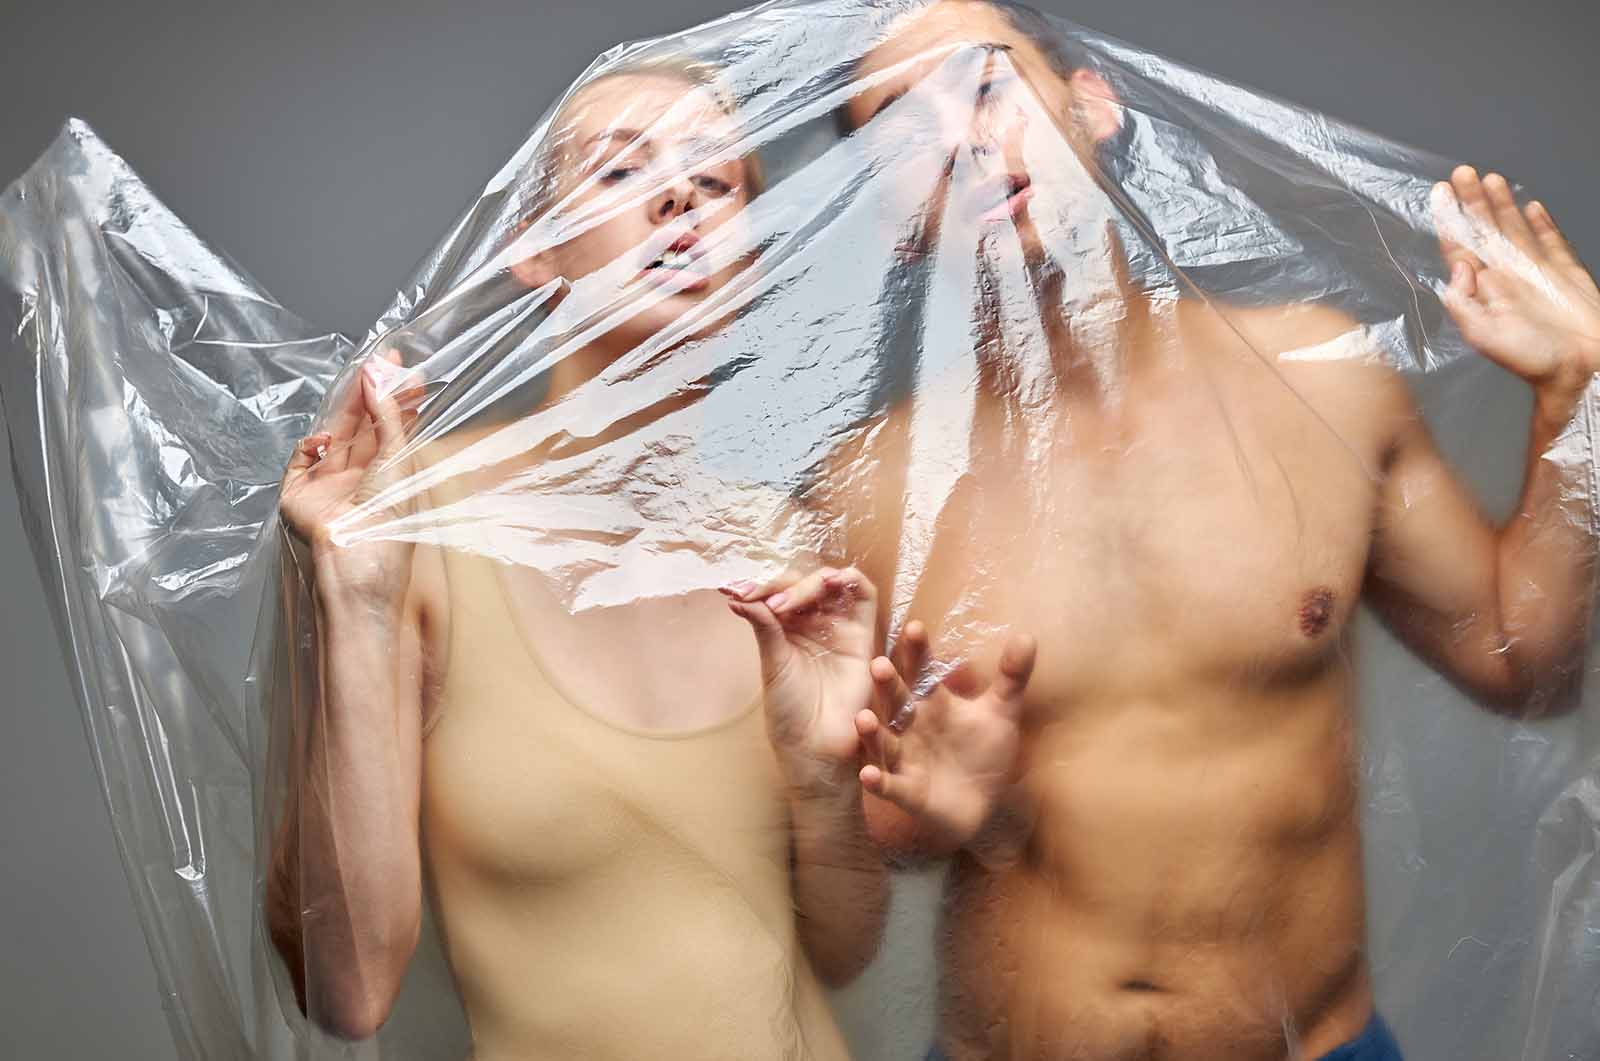 stock photo of models wrapped in plastic wrap